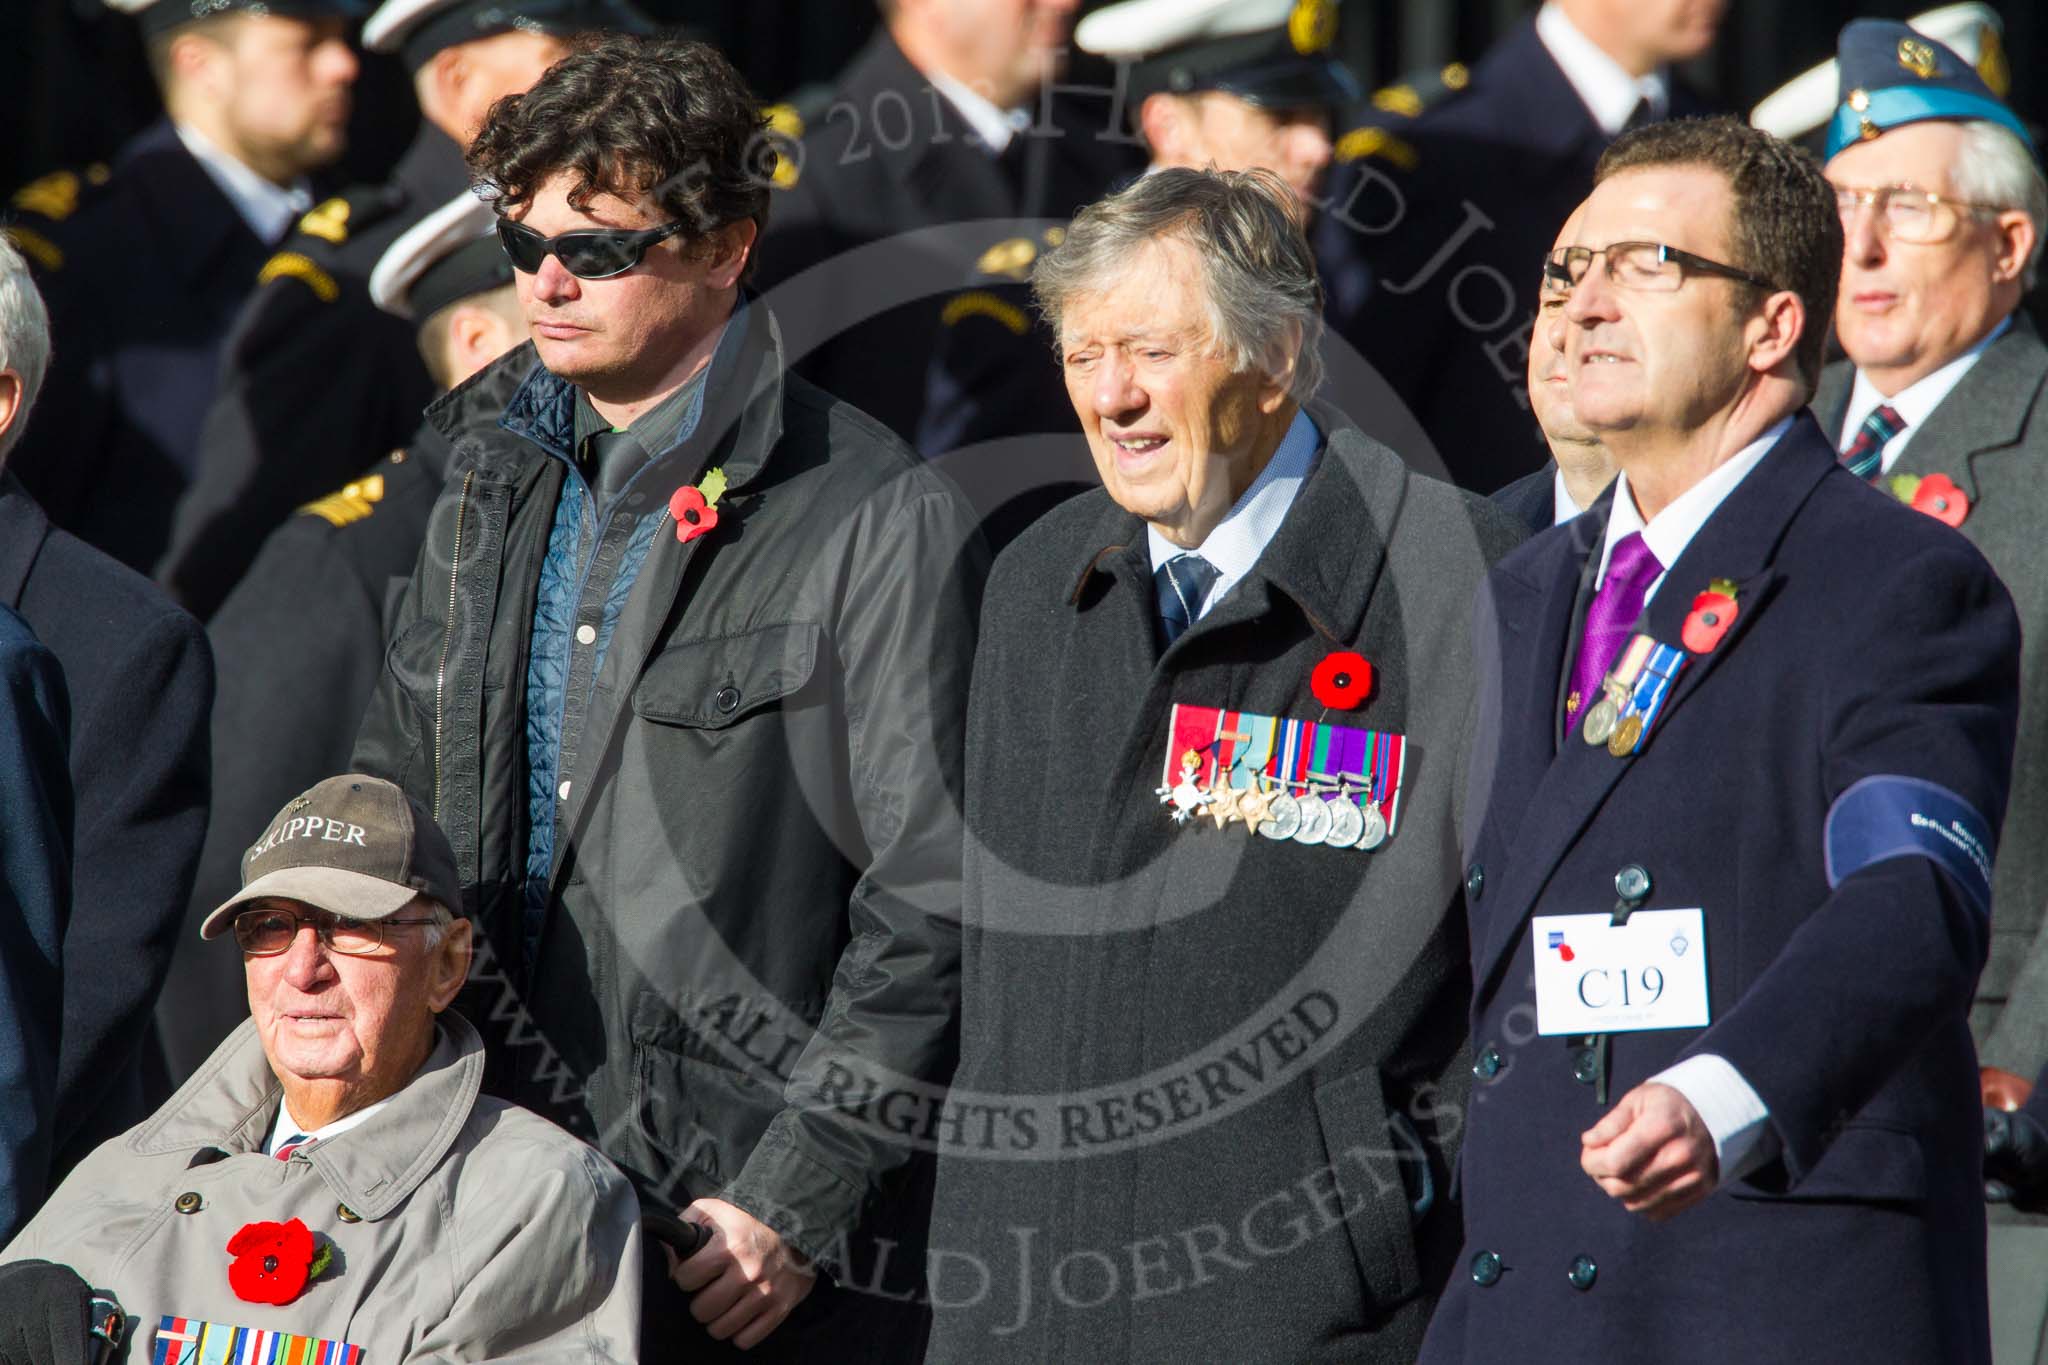 Remembrance Sunday at the Cenotaph in London 2014: Group C19 - Royal Air Forces Ex-Prisoner's of War Association.
Press stand opposite the Foreign Office building, Whitehall, London SW1,
London,
Greater London,
United Kingdom,
on 09 November 2014 at 11:40, image #163